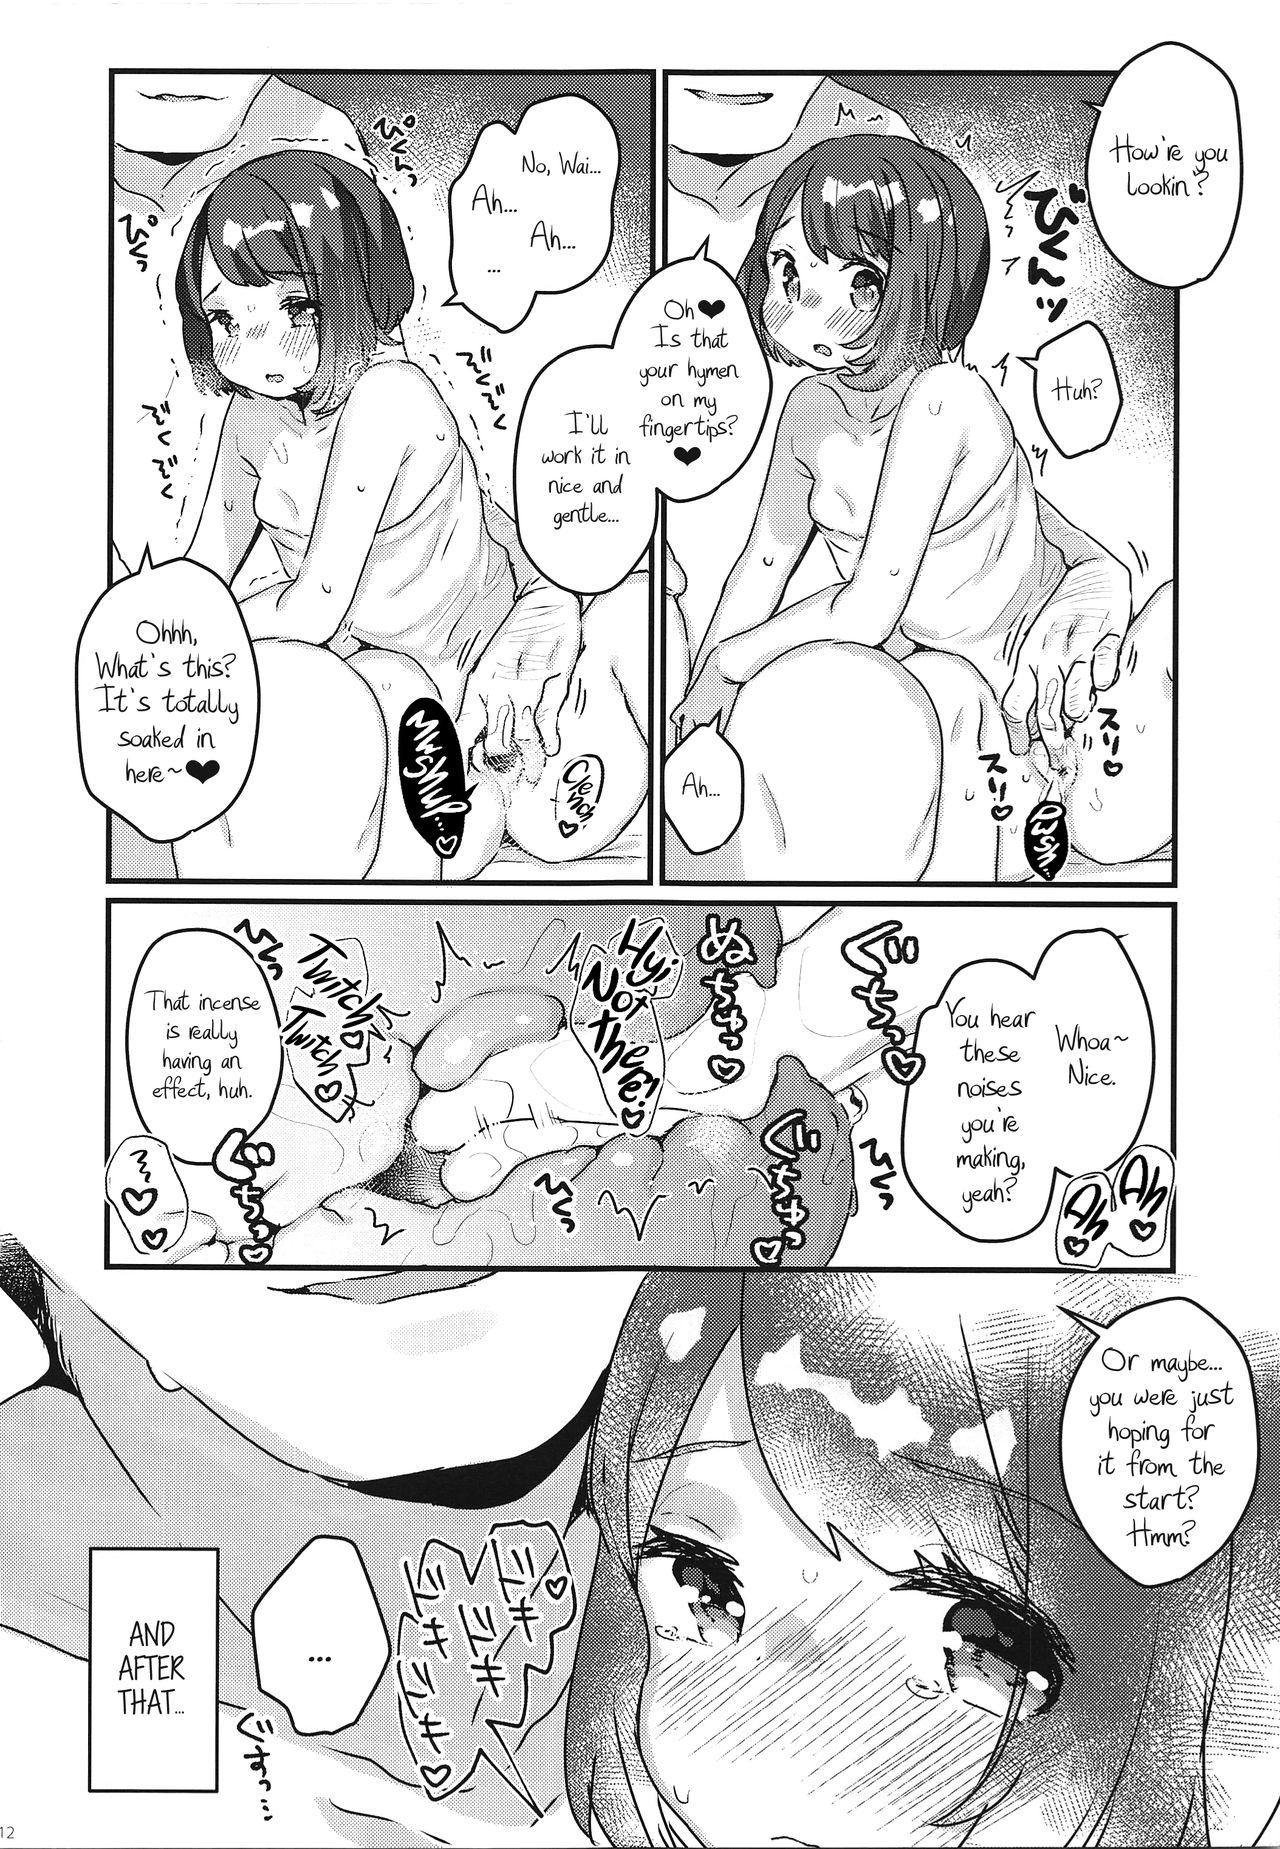 Licking "Datte Fuku, Taka Iindamon" | "I Mean, Clothes Are Just so Expensive~" - Pokemon Amateur Free Porn - Page 12